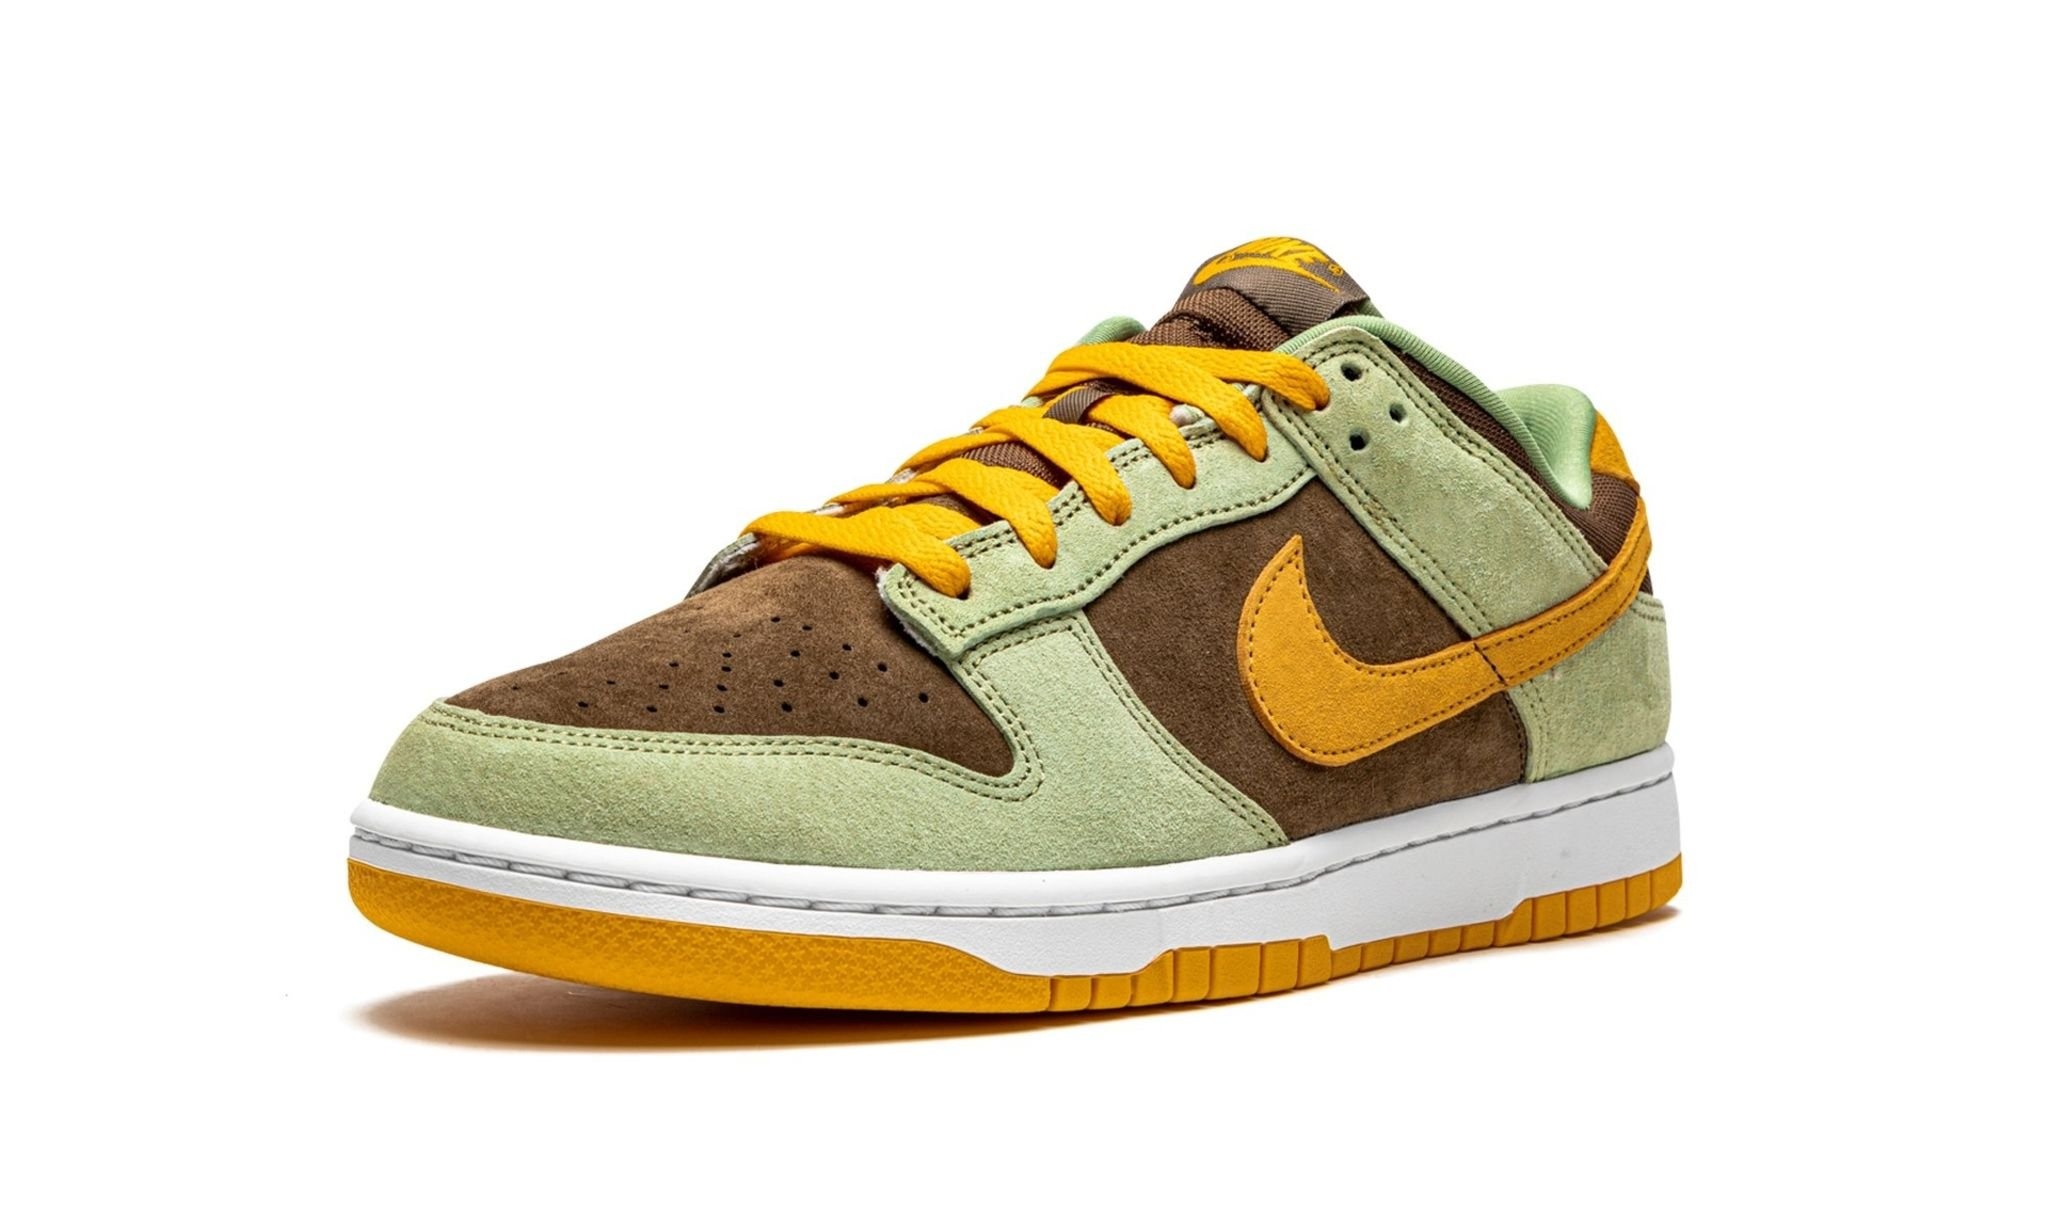 Dunk Low "Dusty Olive" - 4